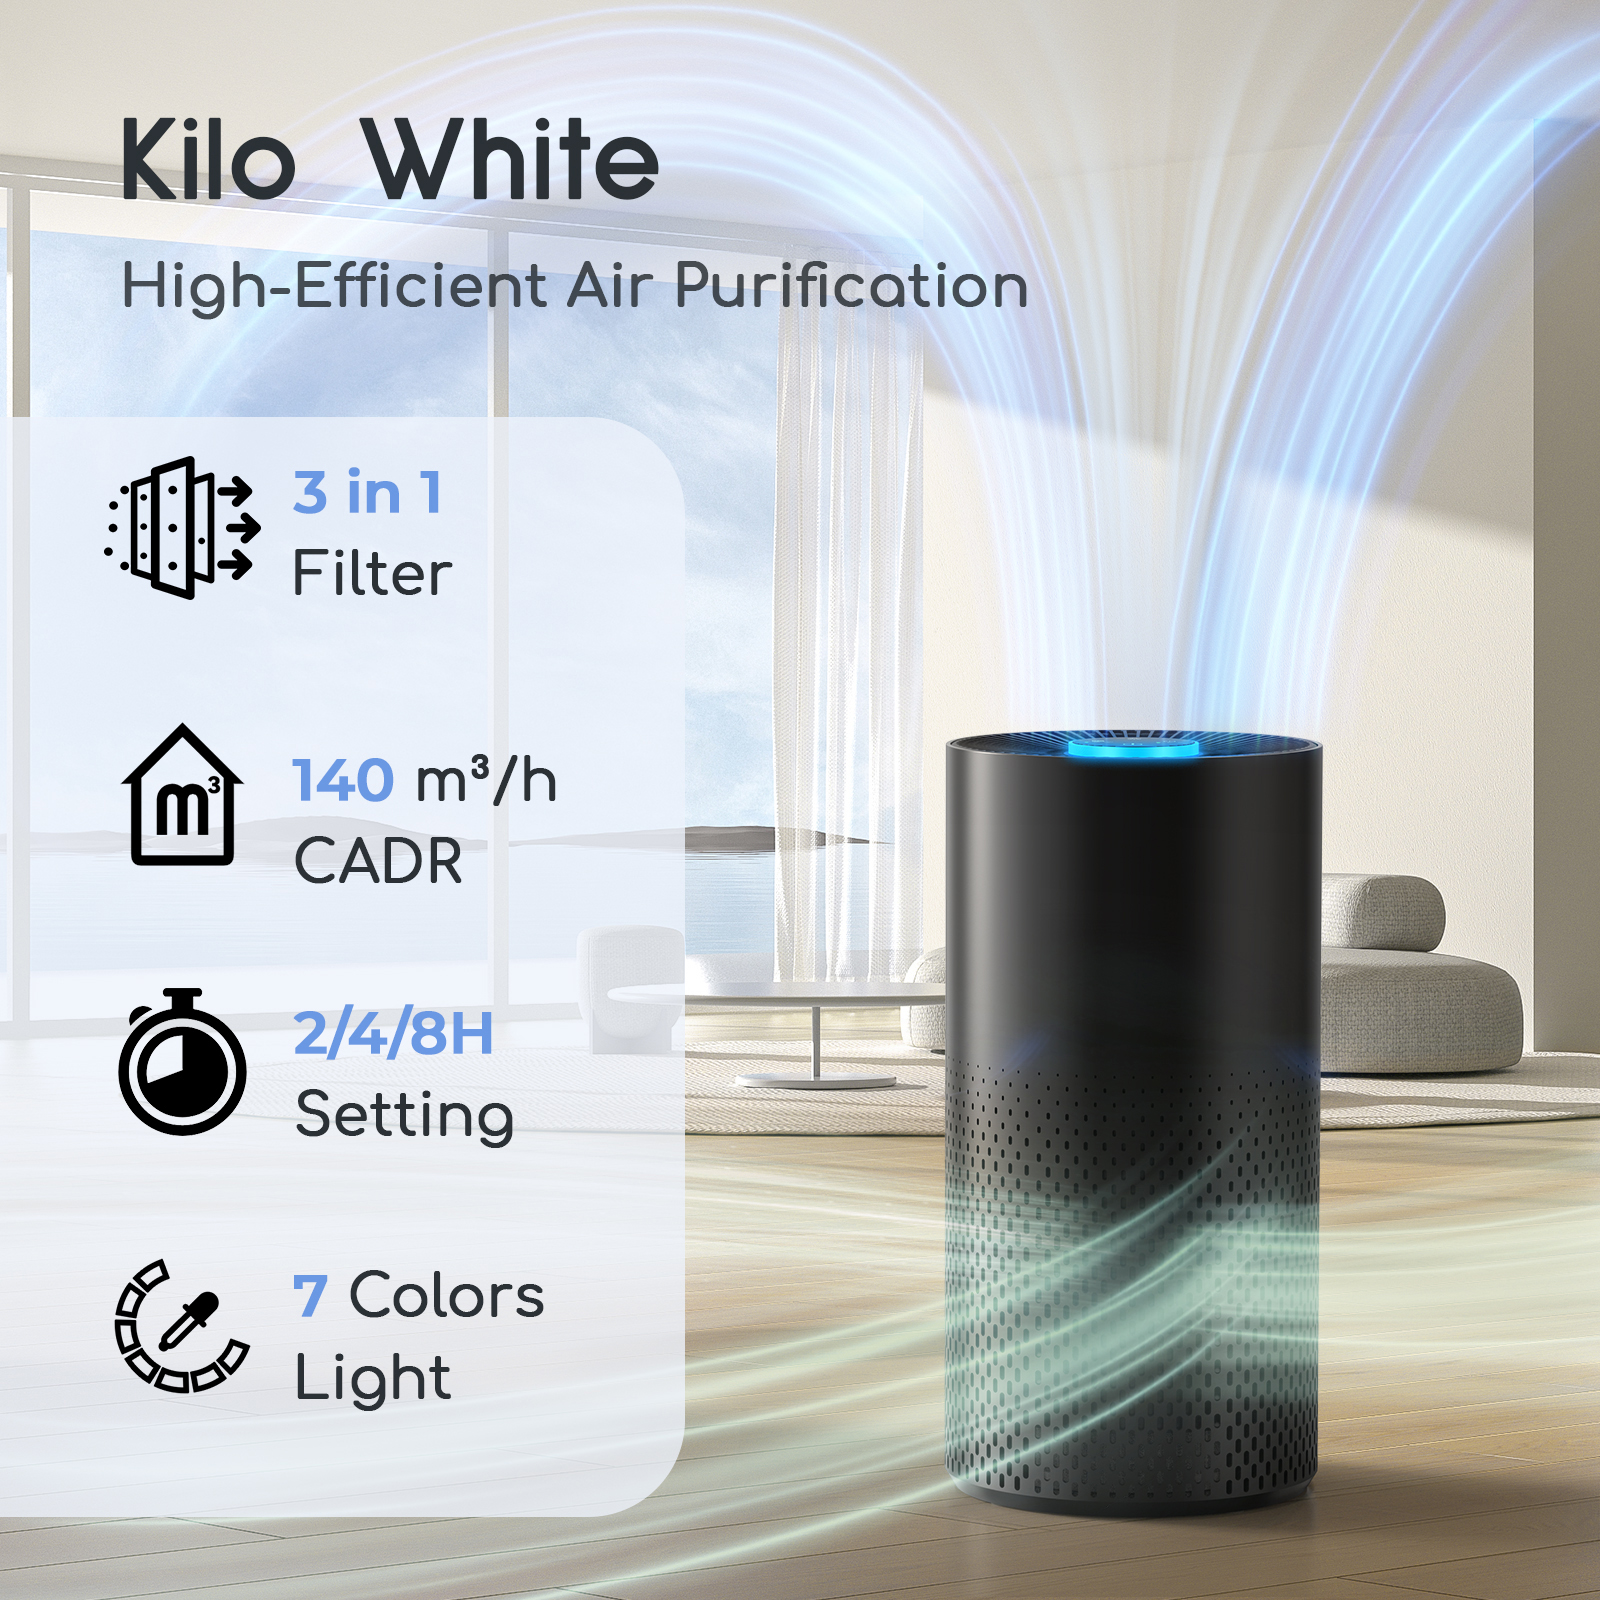 

Air Purifiers For Home Bedroom Large Room Up To 1076 Ft, True Hepa Filter For Pets Dust Pollen Allergies Dander Mold Odor Smoke, 22db&7 Color Light, Kilo